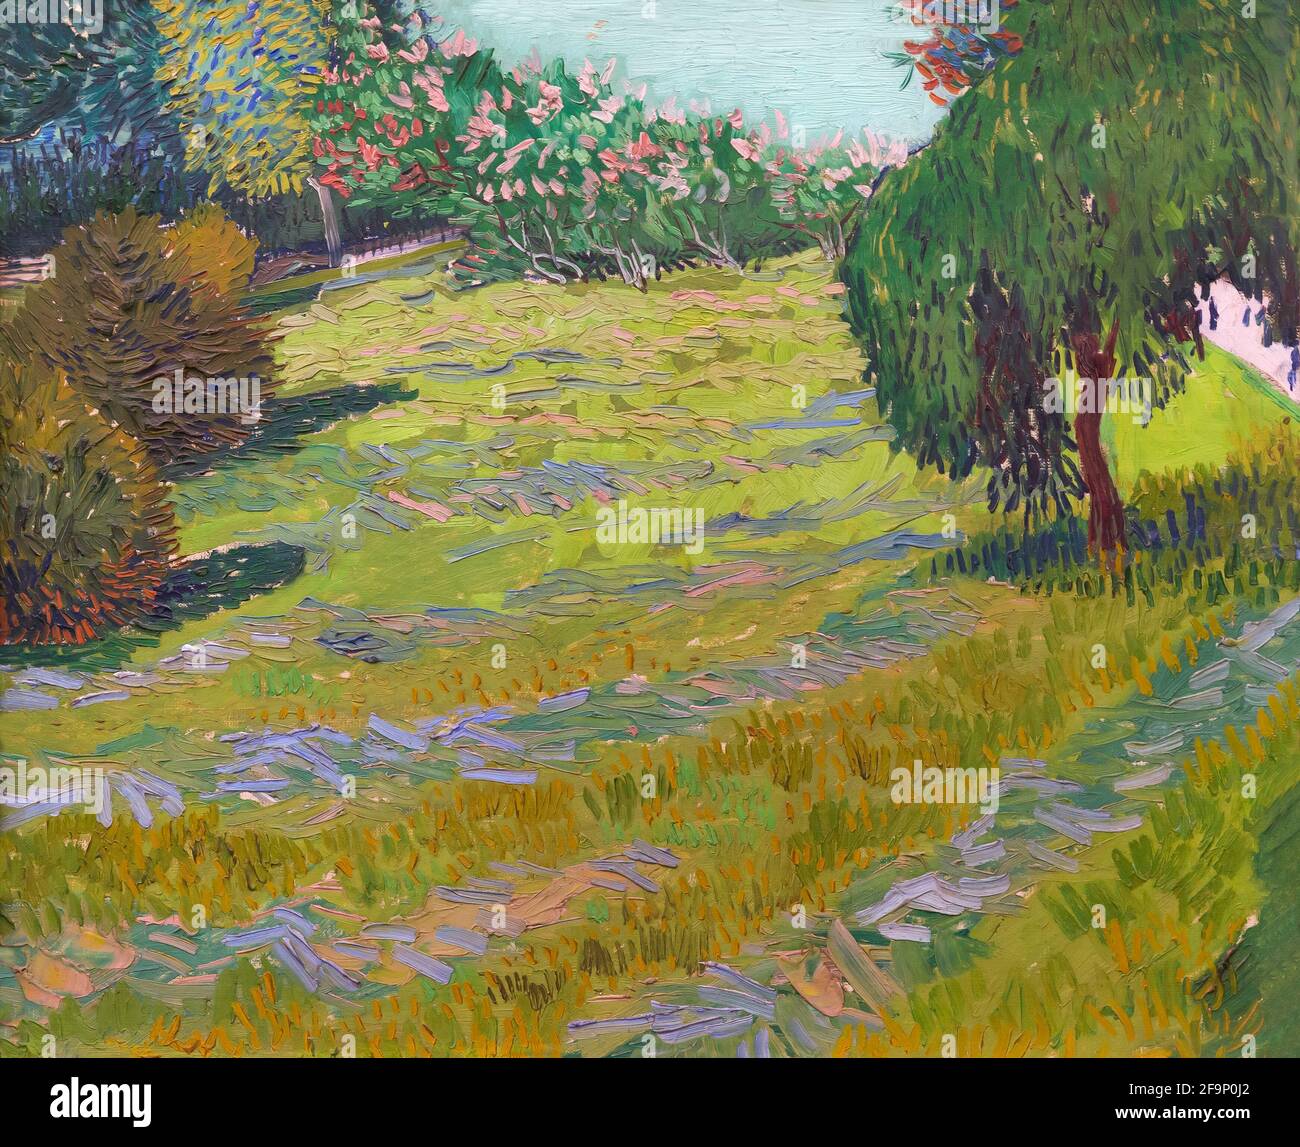 Garden with Weeping WIllow, Sunny Lawn in a Public Park, Arles, Vincent van Gogh, 1888, Stock Photo